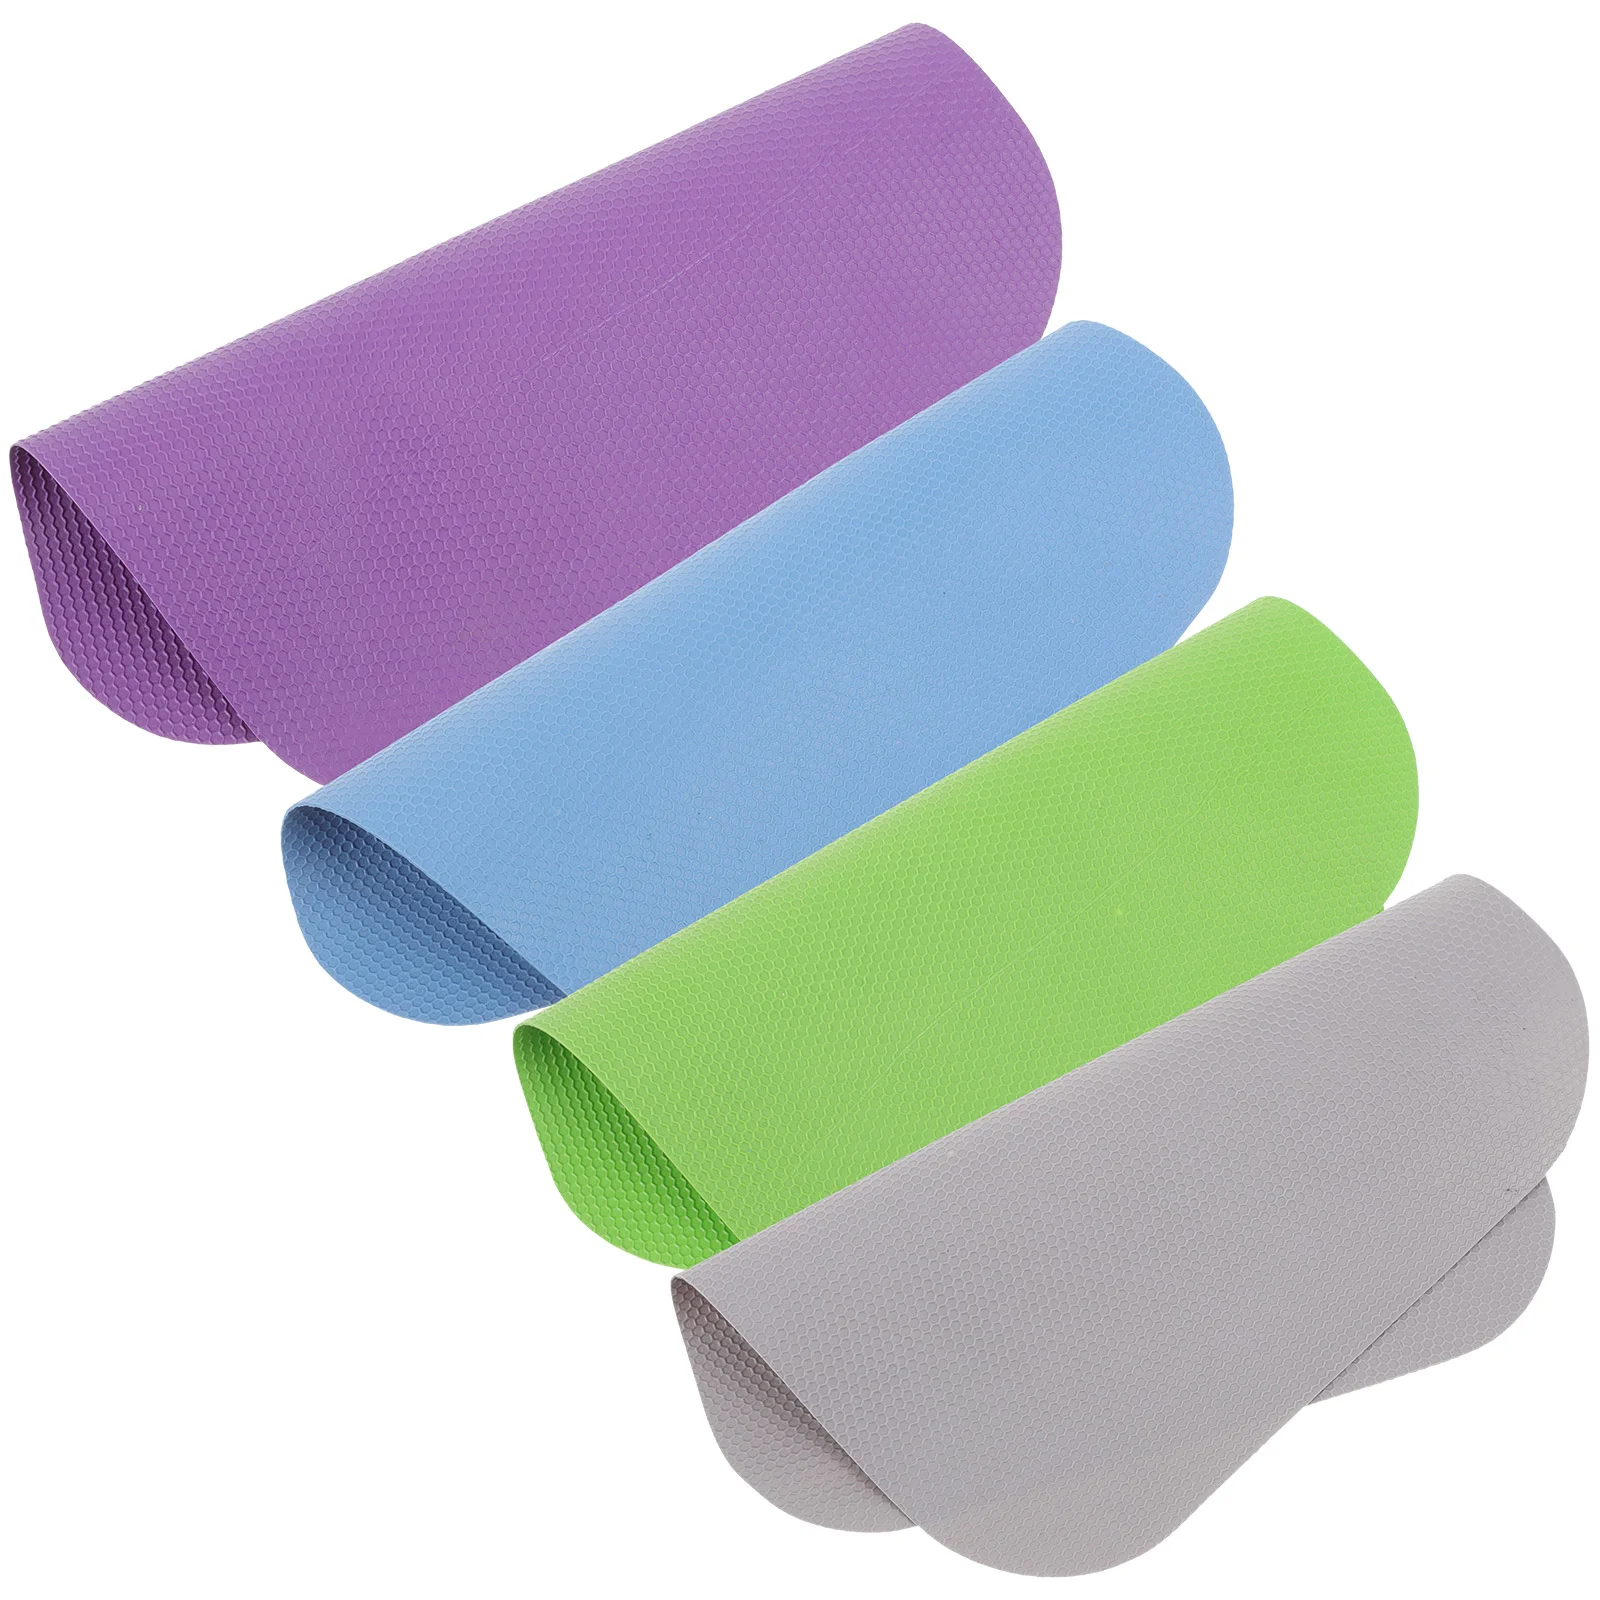 

4 Pcs Rubber Bottle Opening Mat Heat Resistance Pads Jar Opener Gripper Colorful Coasters Mats Anti-skid Cup Table Drinks